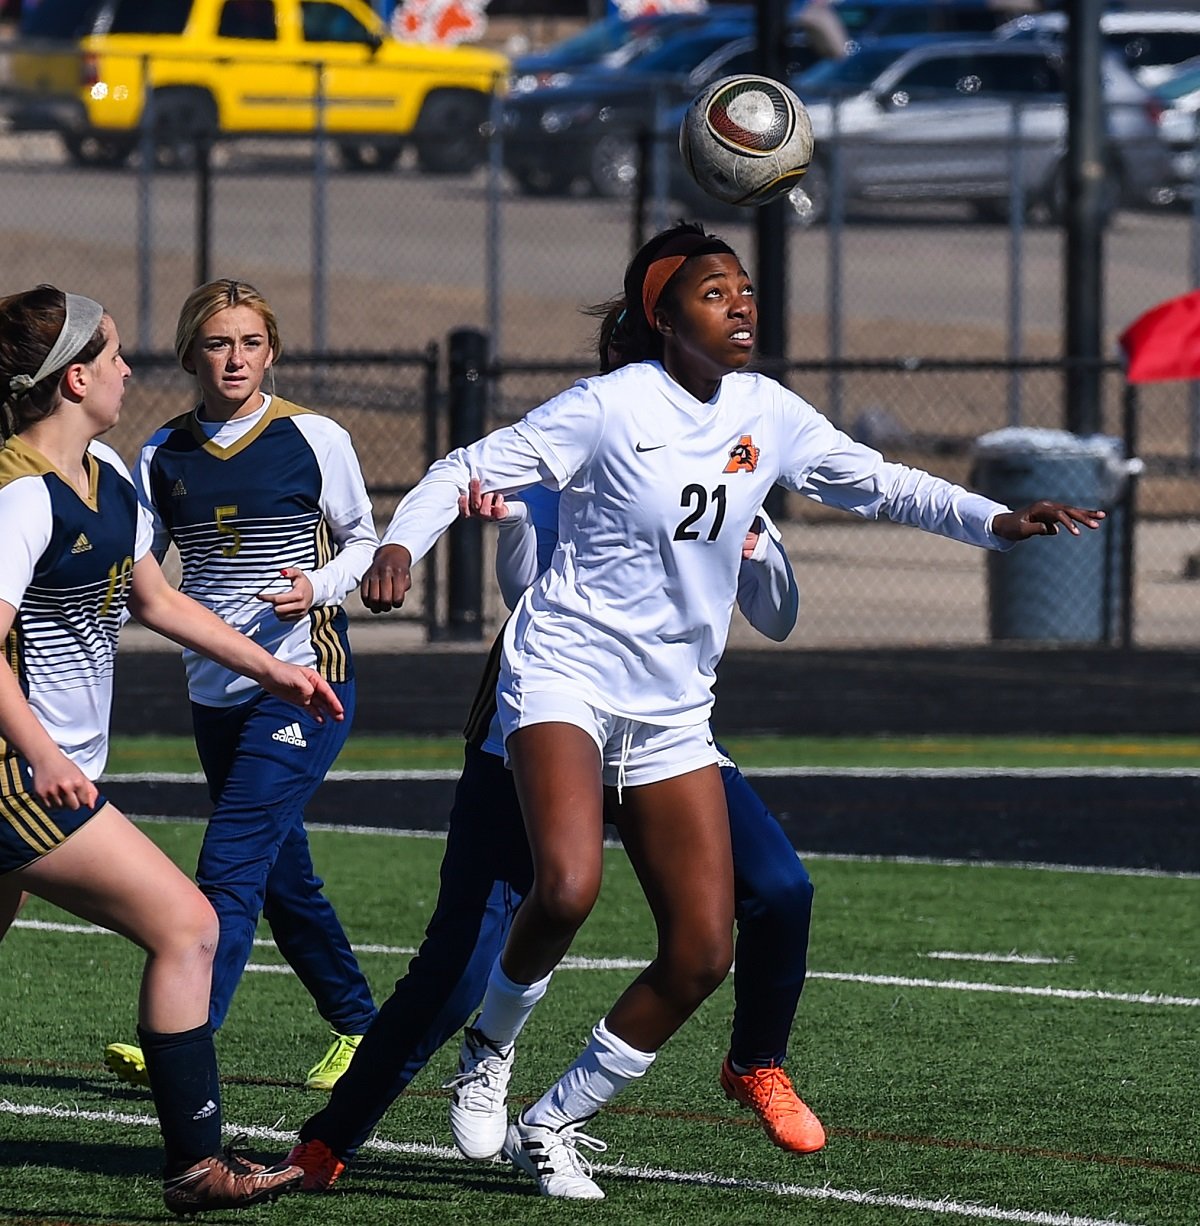 Aledo senior forward Ashley Ray, shown executing a header today against Little Elm, scored both goals in the Ladycats' 2-0 win over the Lobos at Bearcat Stadium. Photo by Howard Hurd